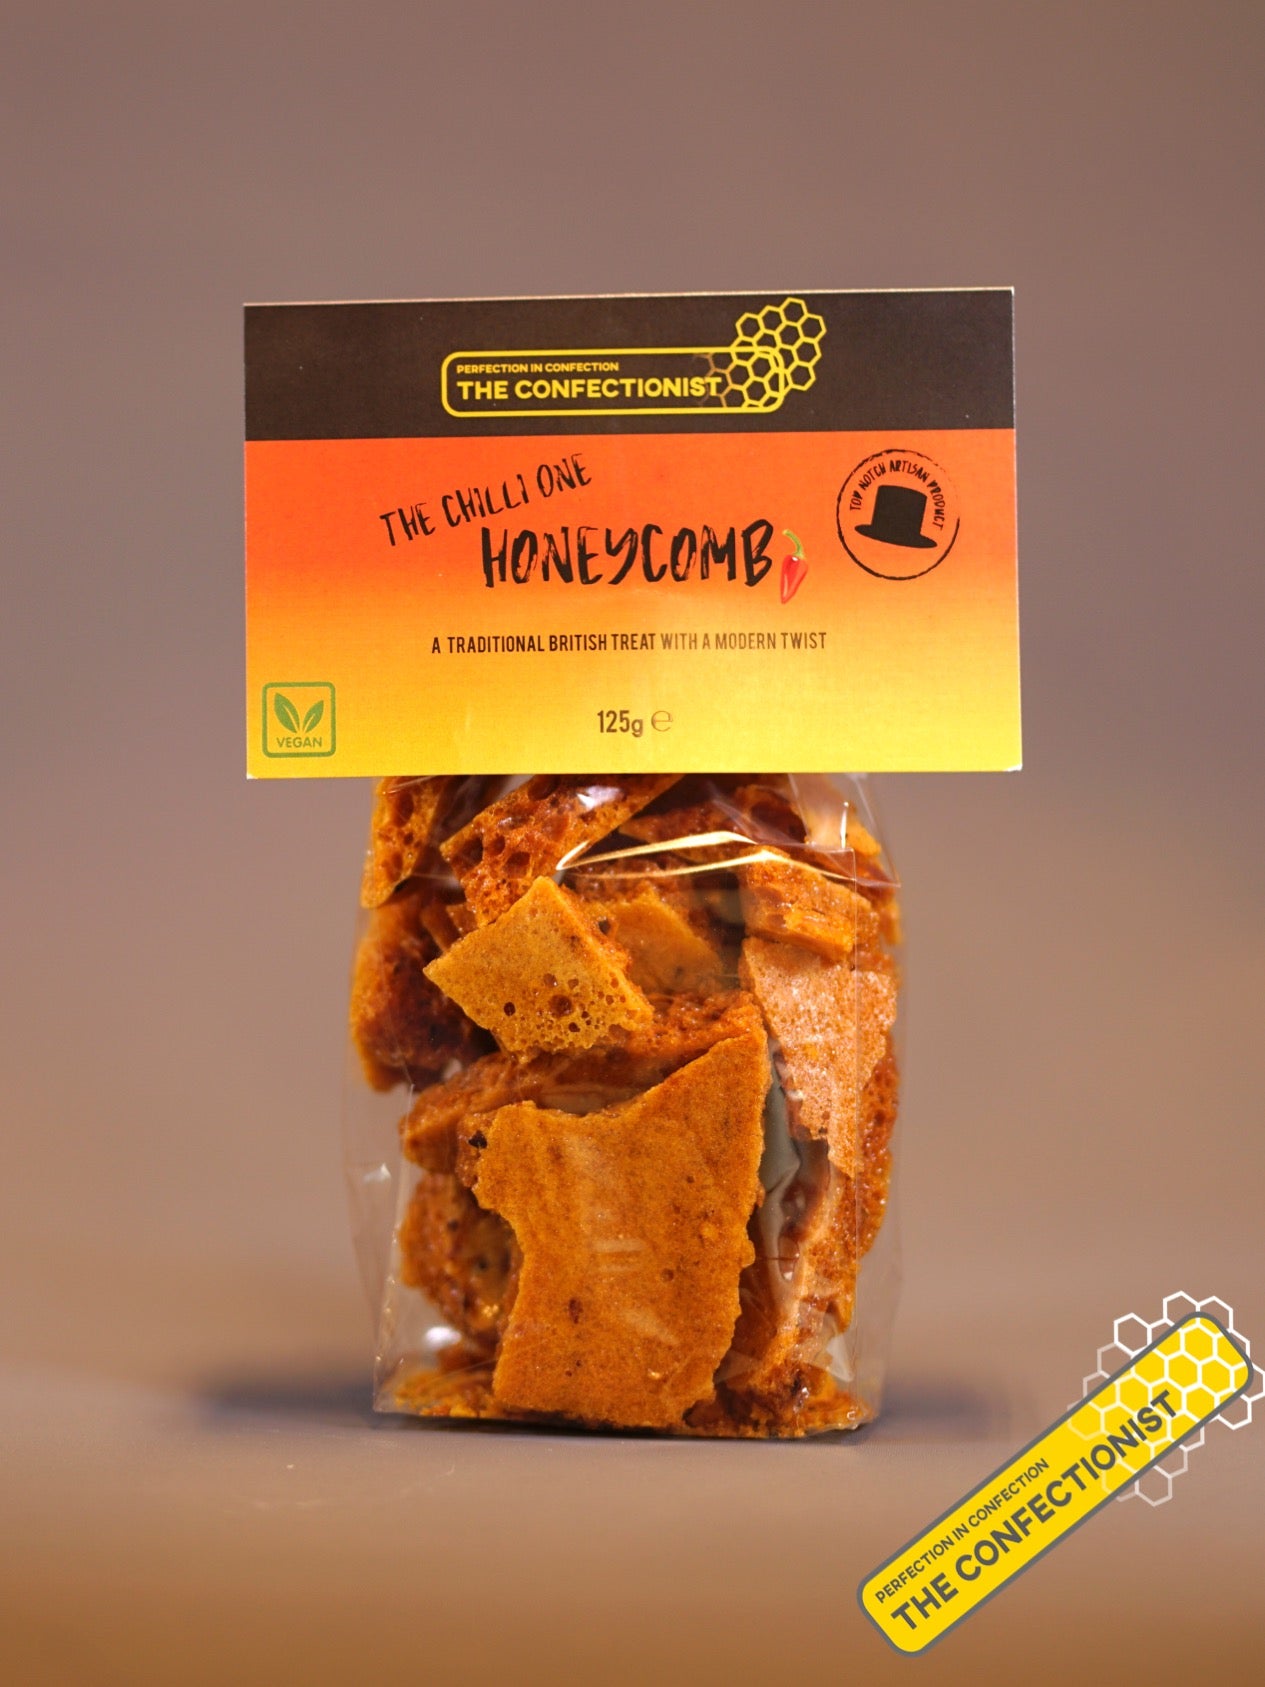 The Confectionist's Chilli Honeycomb 125g